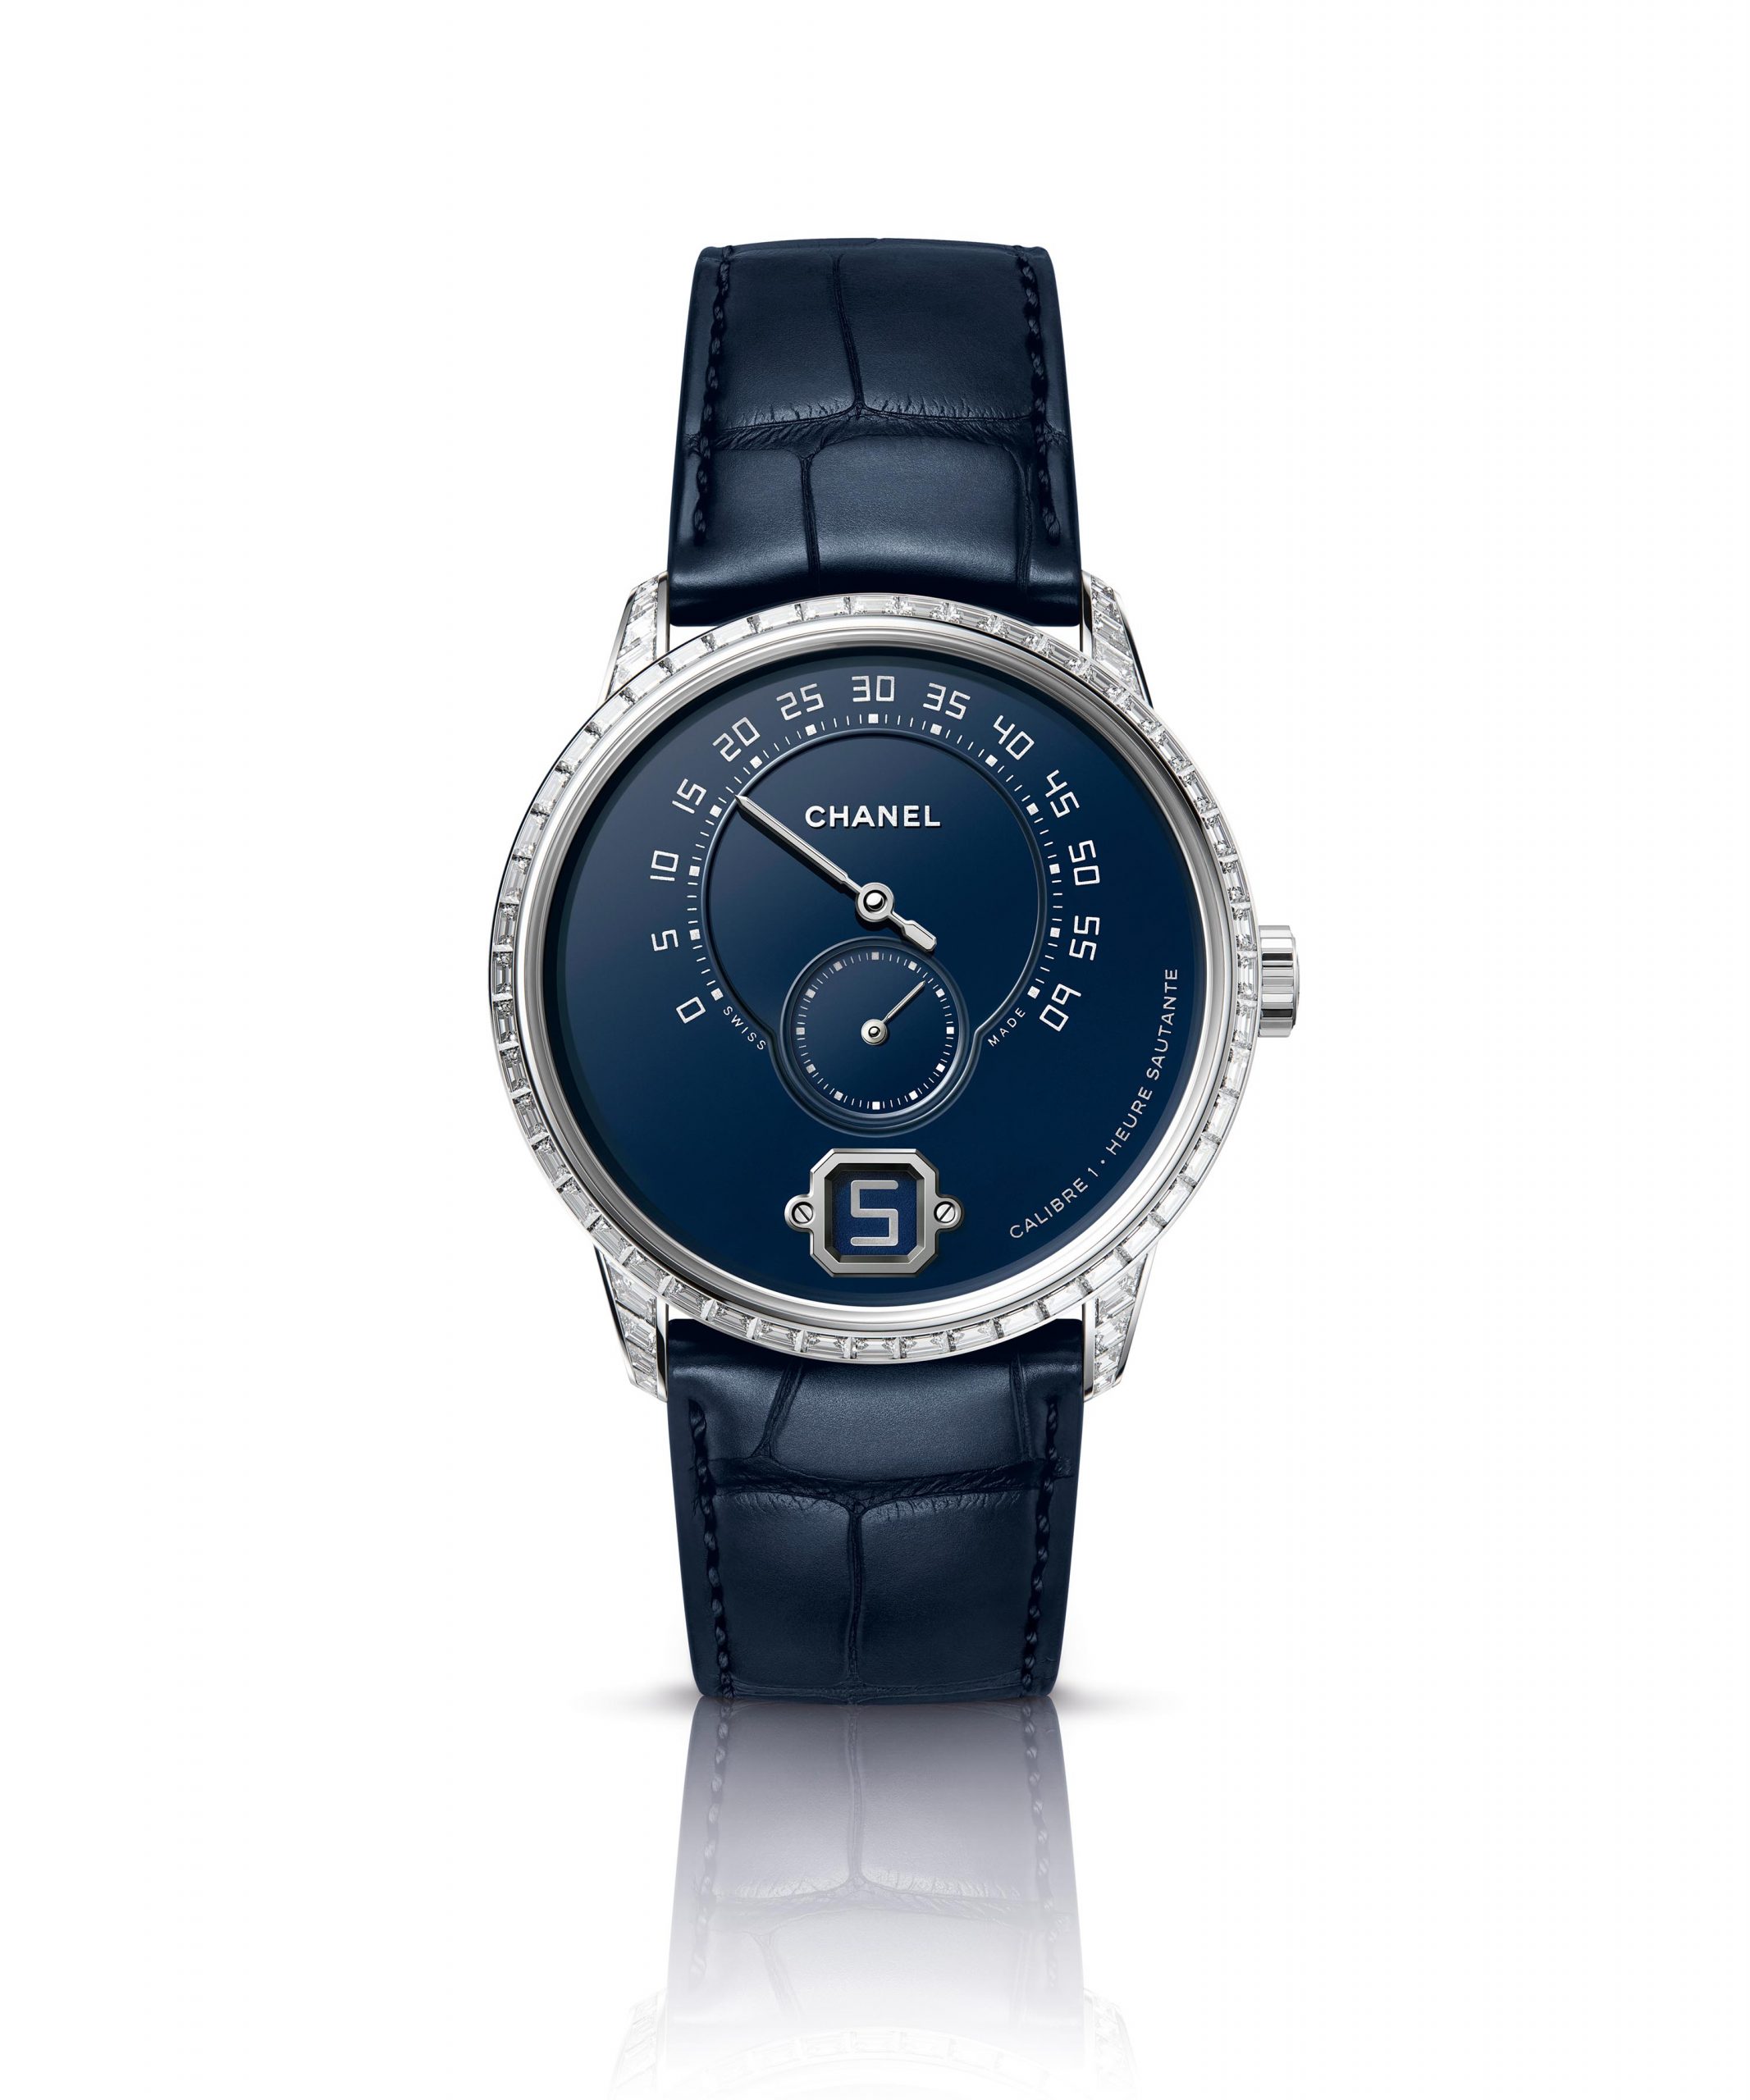 Chanel Unveils A Limited Edition Beverly Hills Timepiece